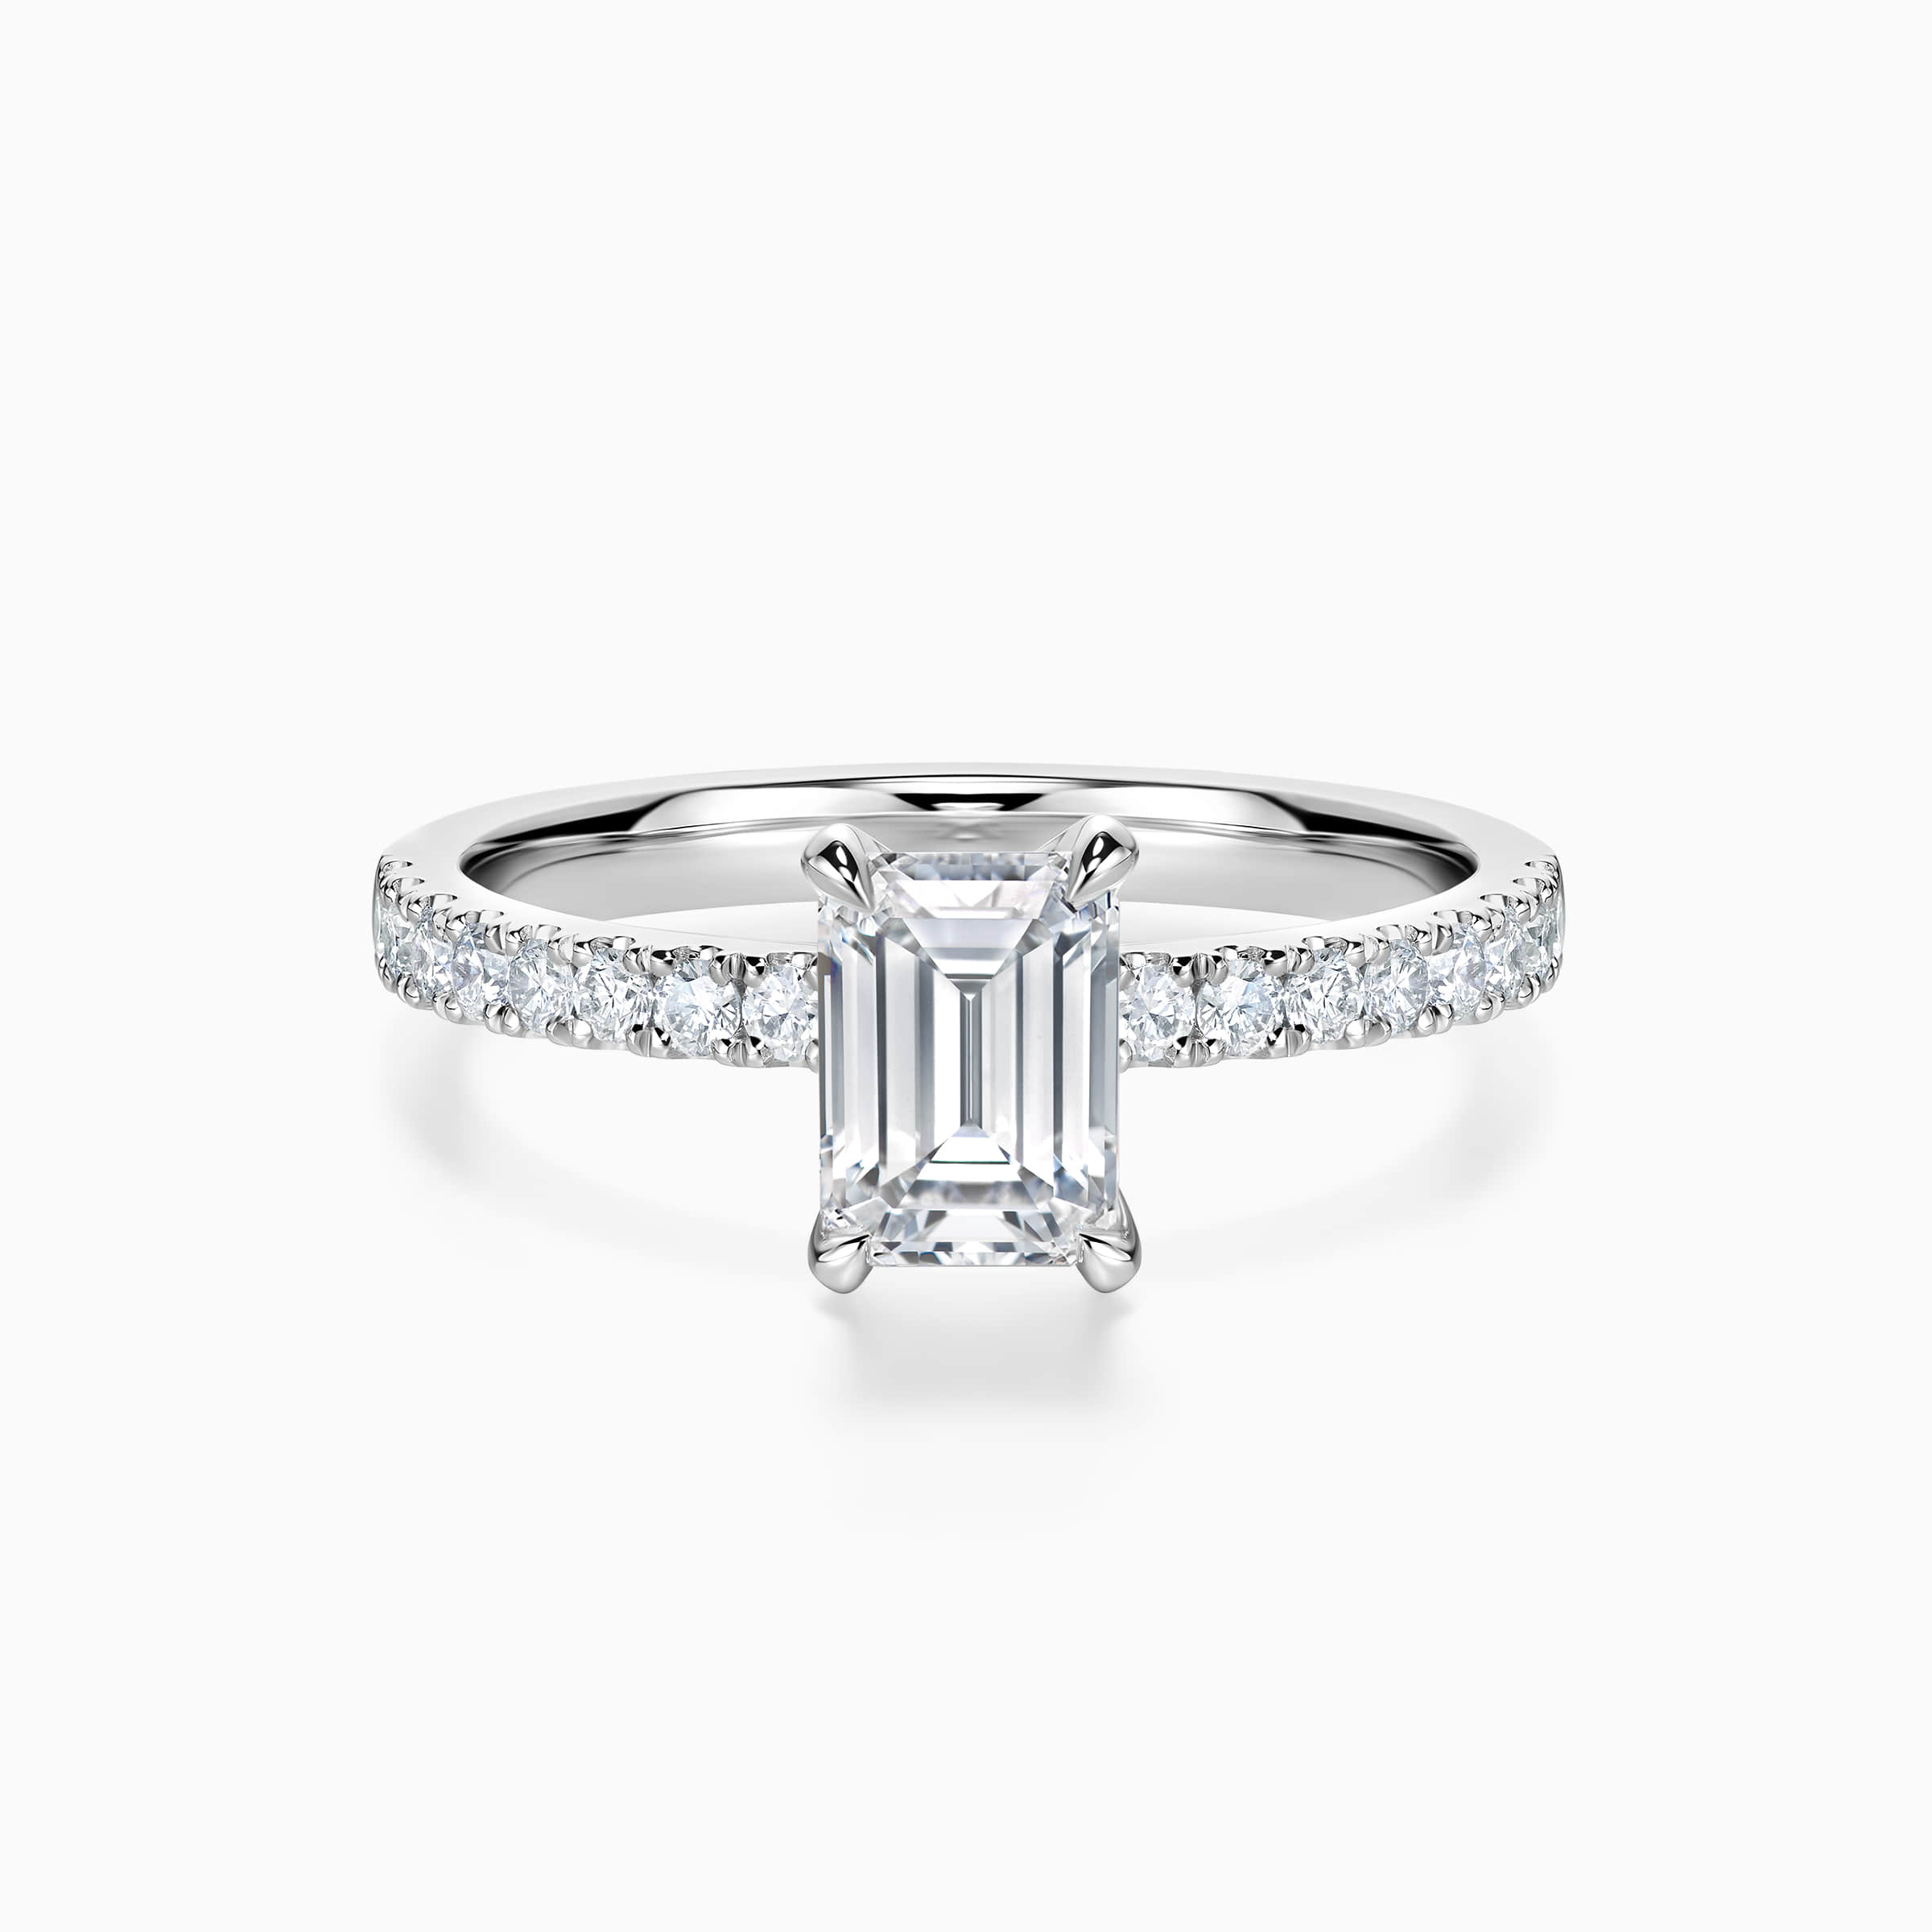 DR forever emerald cut promise ring